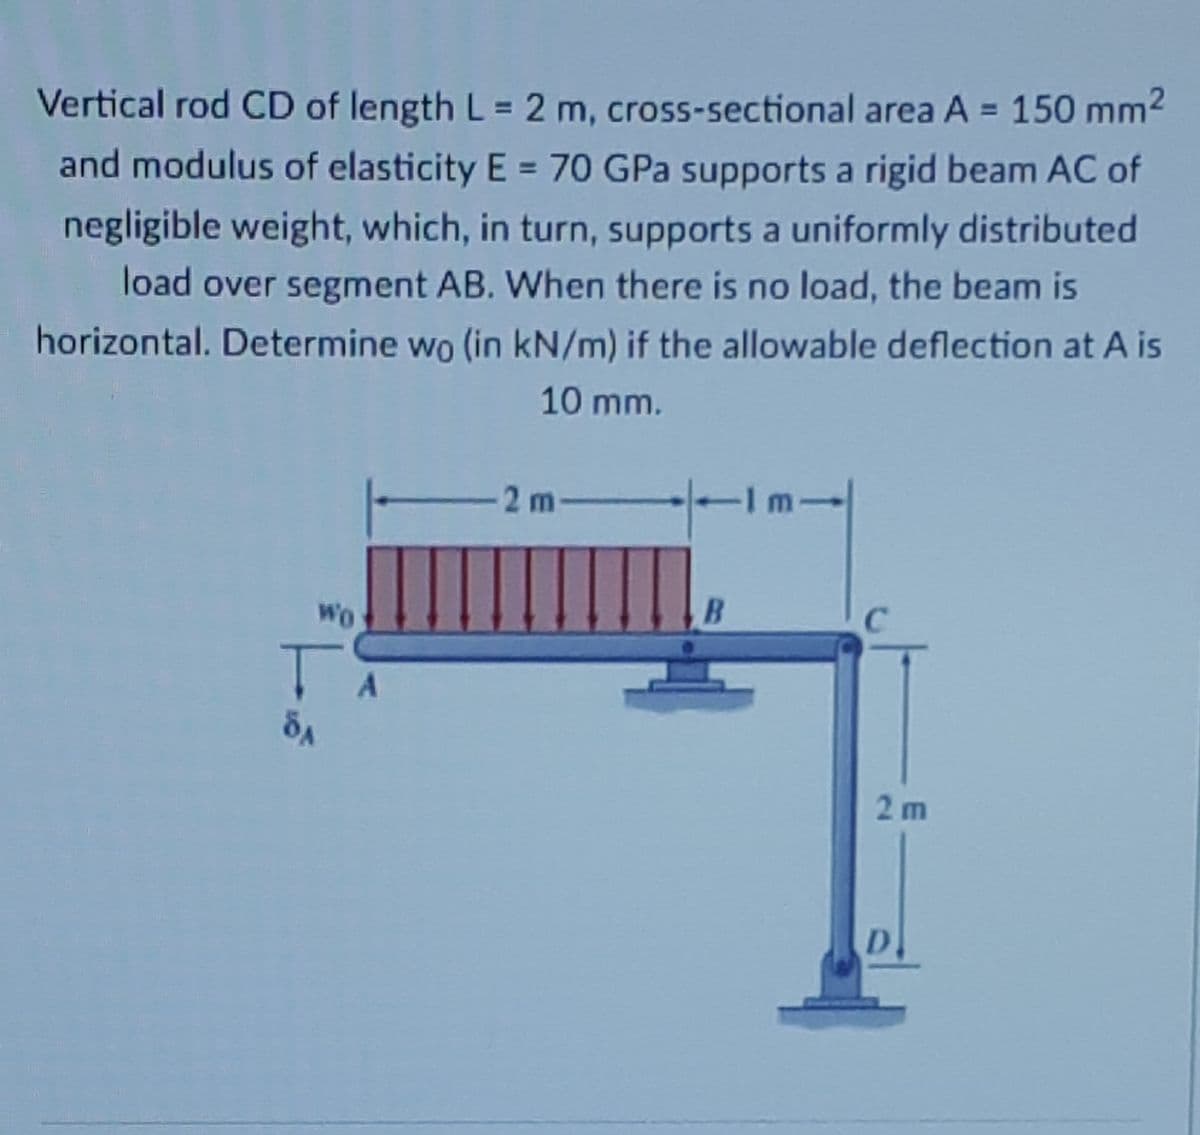 Vertical rod CD of length L = 2 m, cross-sectional area A 150 mm2
%3D
and modulus of elasticity E = 70 GPa supports a rigid beam AC of
negligible weight, which, in turn, supports a uniformly distributed
load over segment AB. When there is no load, the beam is
horizontal. Determine wo (in kN/m) if the allowable deflection at A is
10 mm.
2 m
B.
WO
TA
2 m
D.
